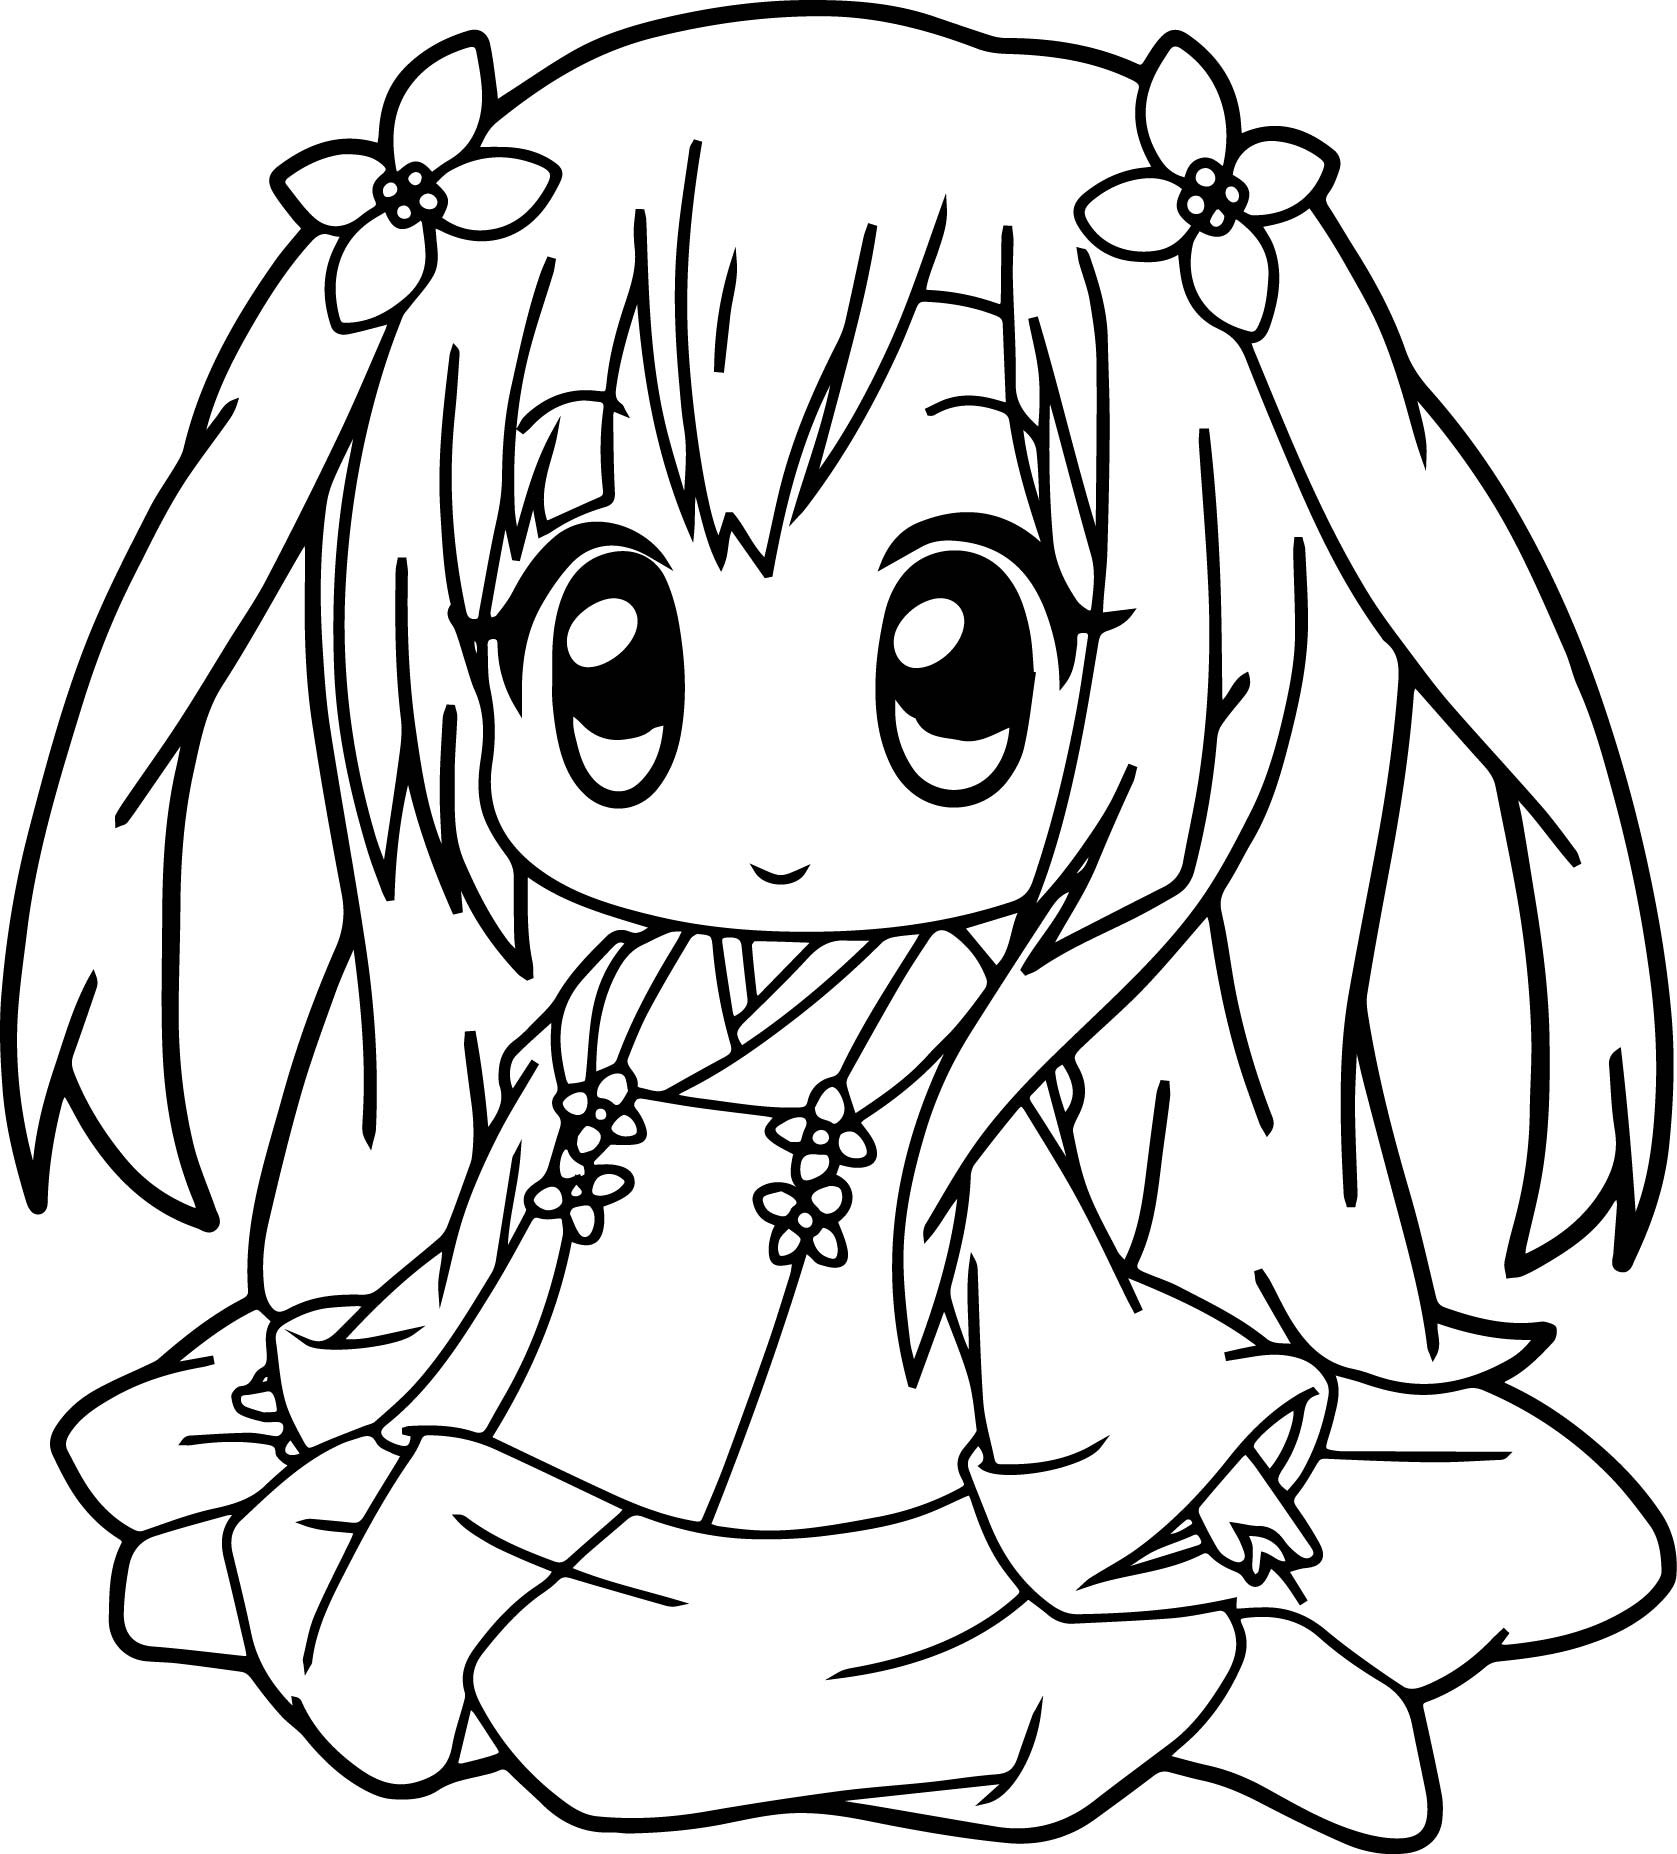 Cute Anime Girls Coloring Pages
 Very Cute Anime Girl Coloring Page